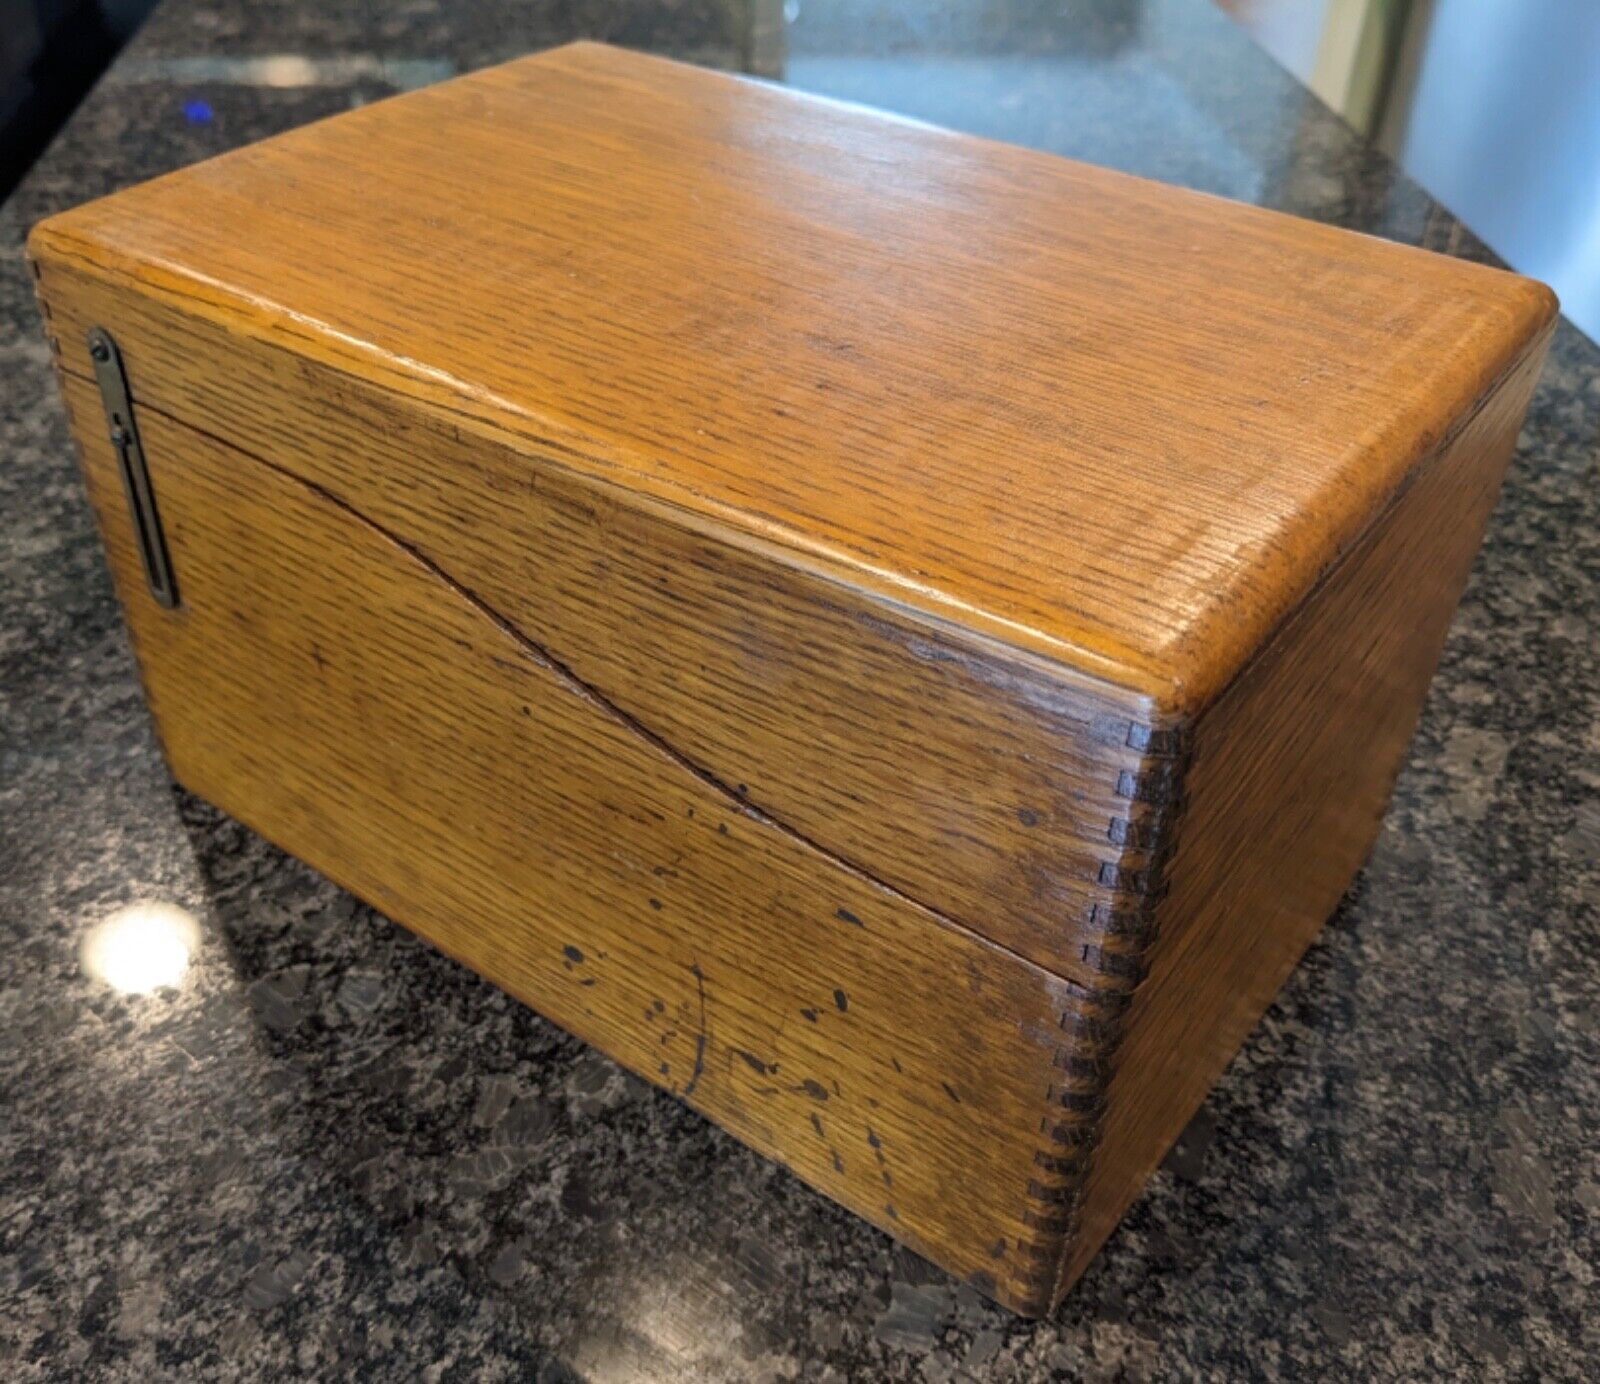 Beautiful 1920s Antique Oak Wood Dovetailed Recipes Box Dovetail Joints